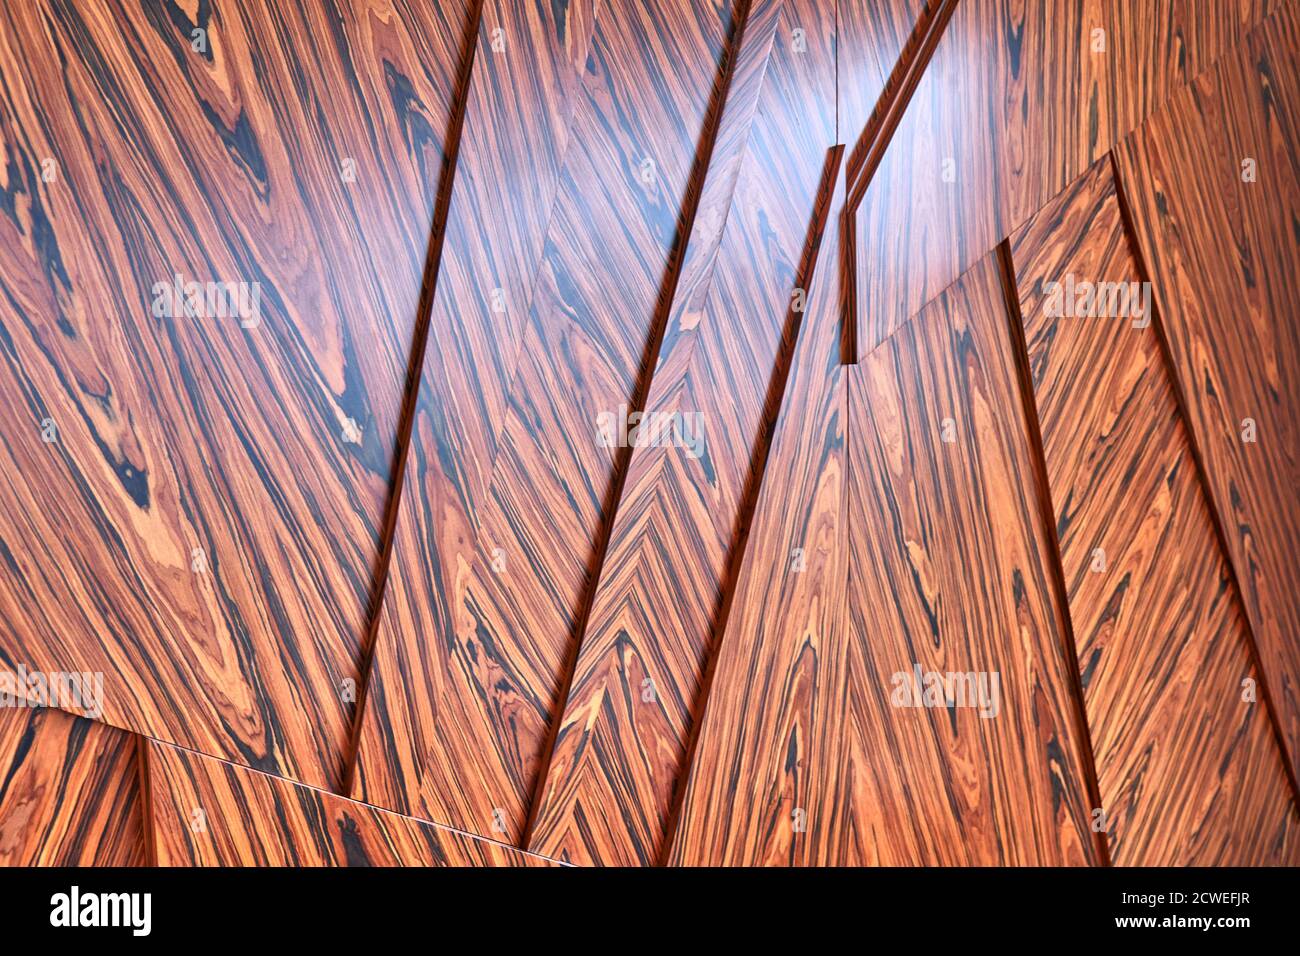 3D wood wall panels. Wood veneer wall panels elements are covered with dust. Rosewood reconstituted veneer. Furniture manufacturing. Closeup Stock Photo